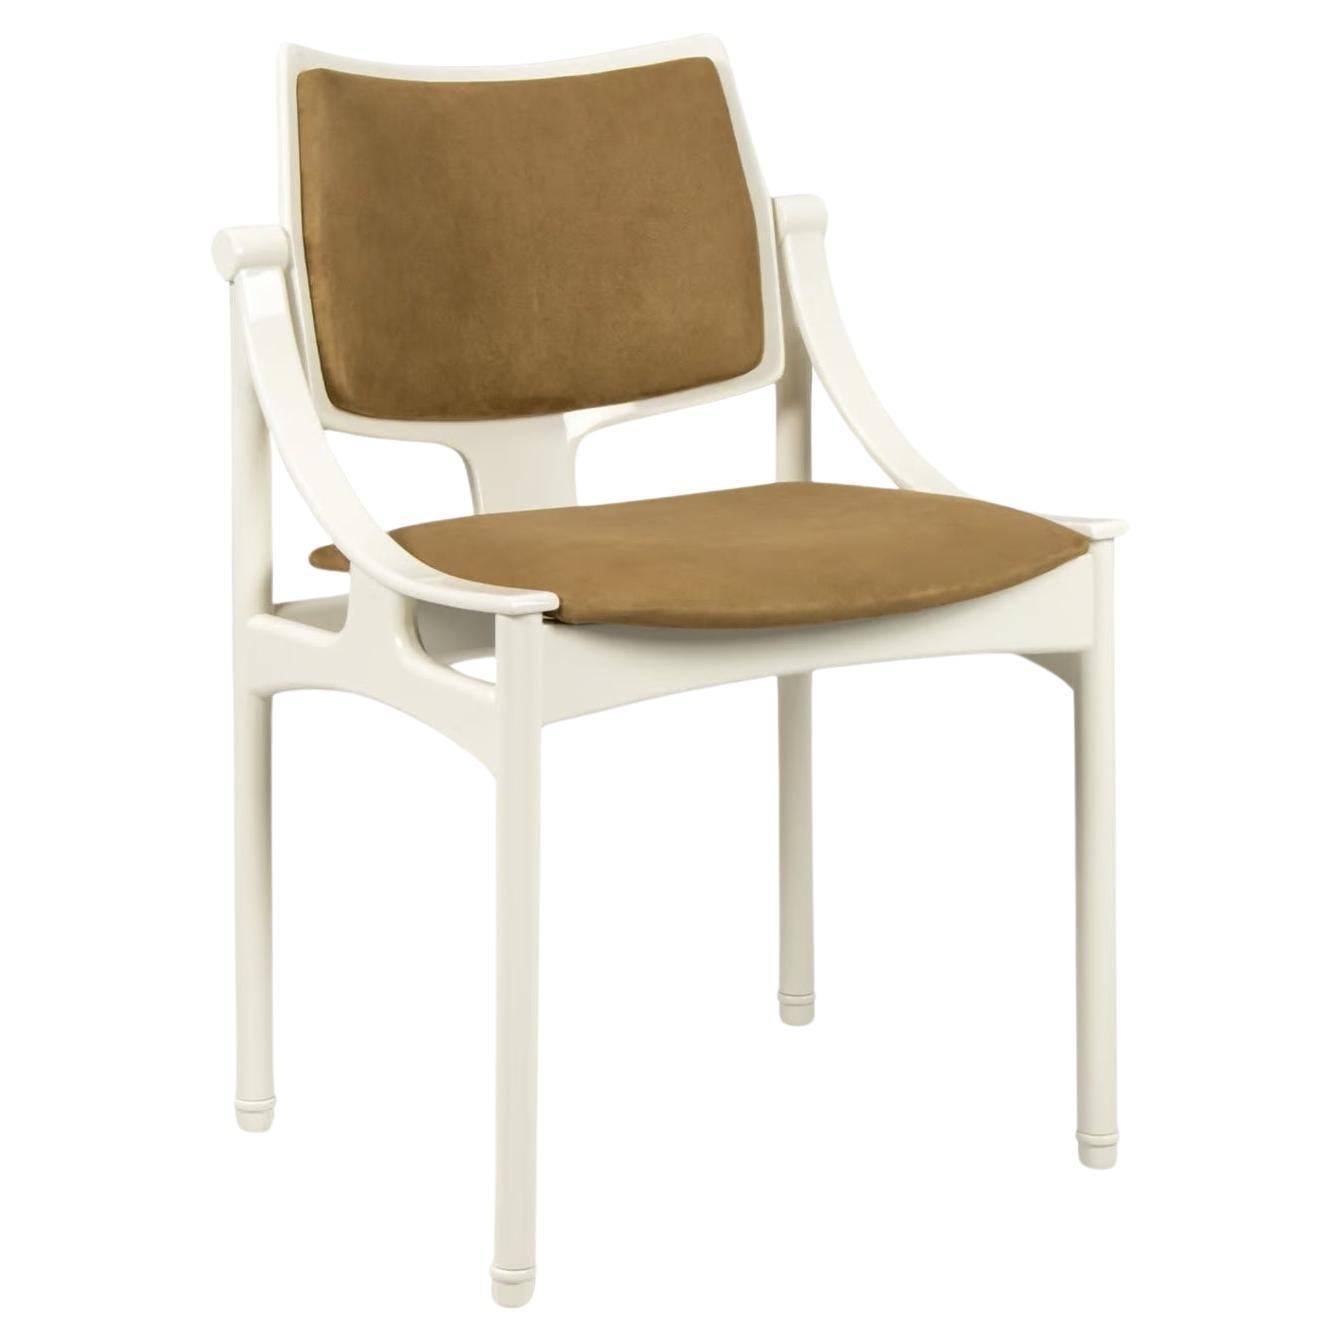 Modern dining chair with a sleek and minimalist design. It has a wooden frame and legs with a backrest that curves gently around the top. it cradles you in comfort with its plush seat and back. Perfect for lingering lunches at home or adding